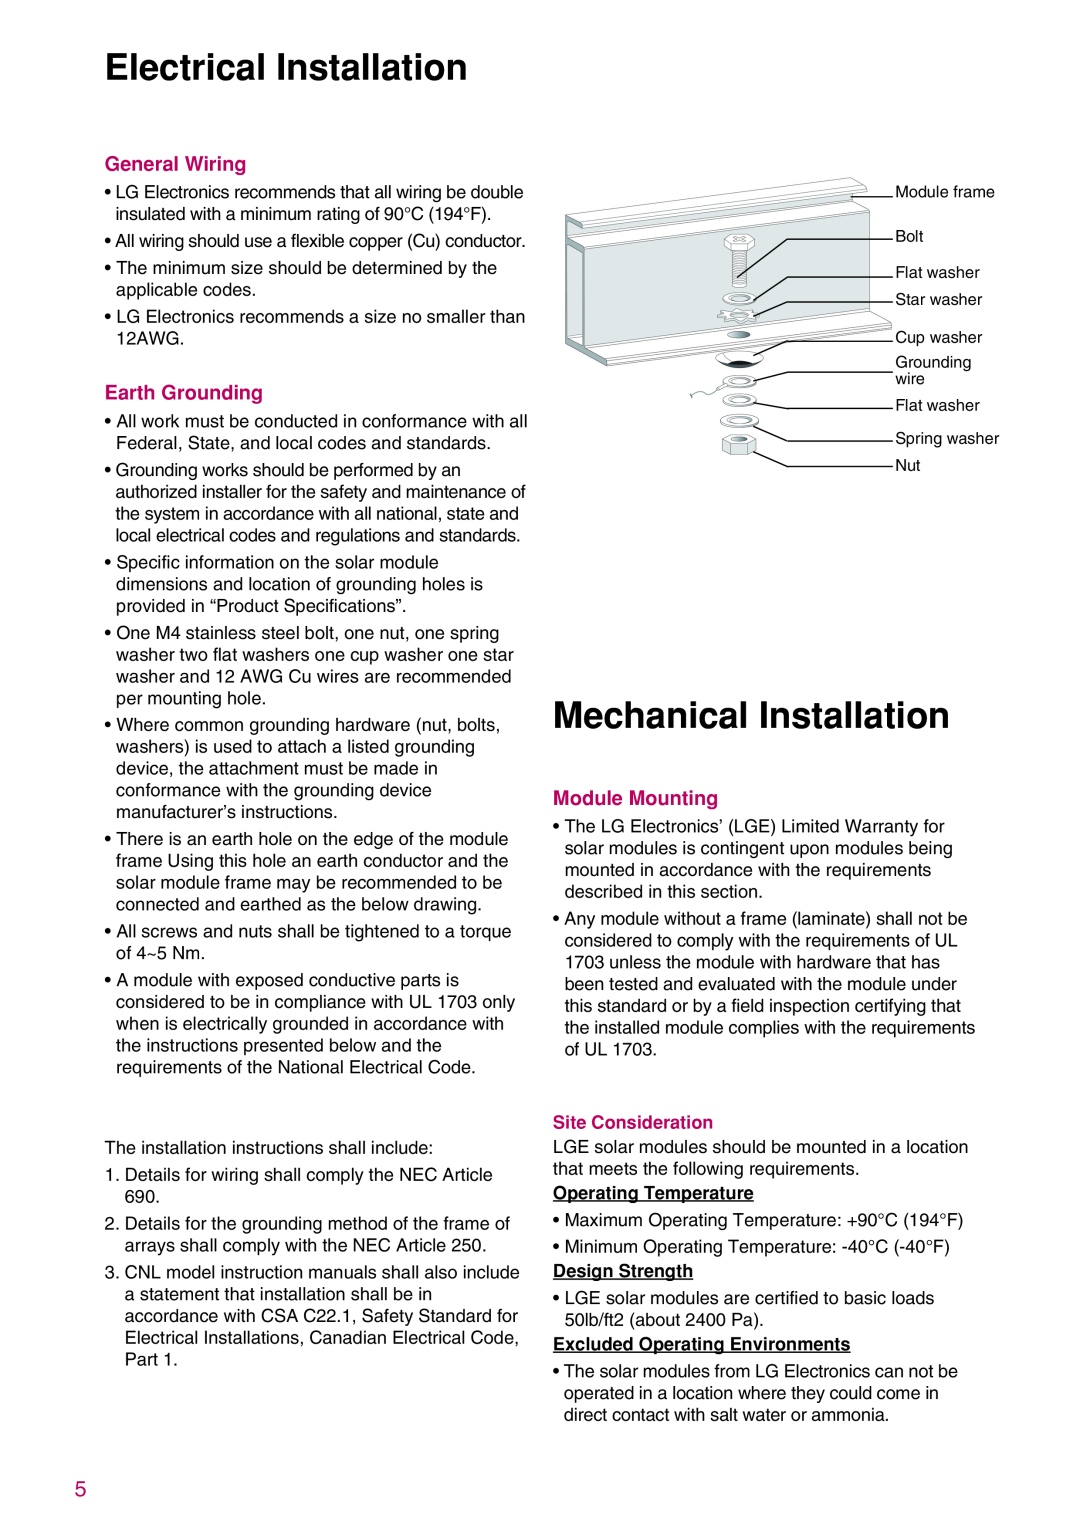 LG Electronics K)-B3, K)-A3 Mechanical Installation, General Wiring, Earth Grounding, Module Mounting, Site Consideration 